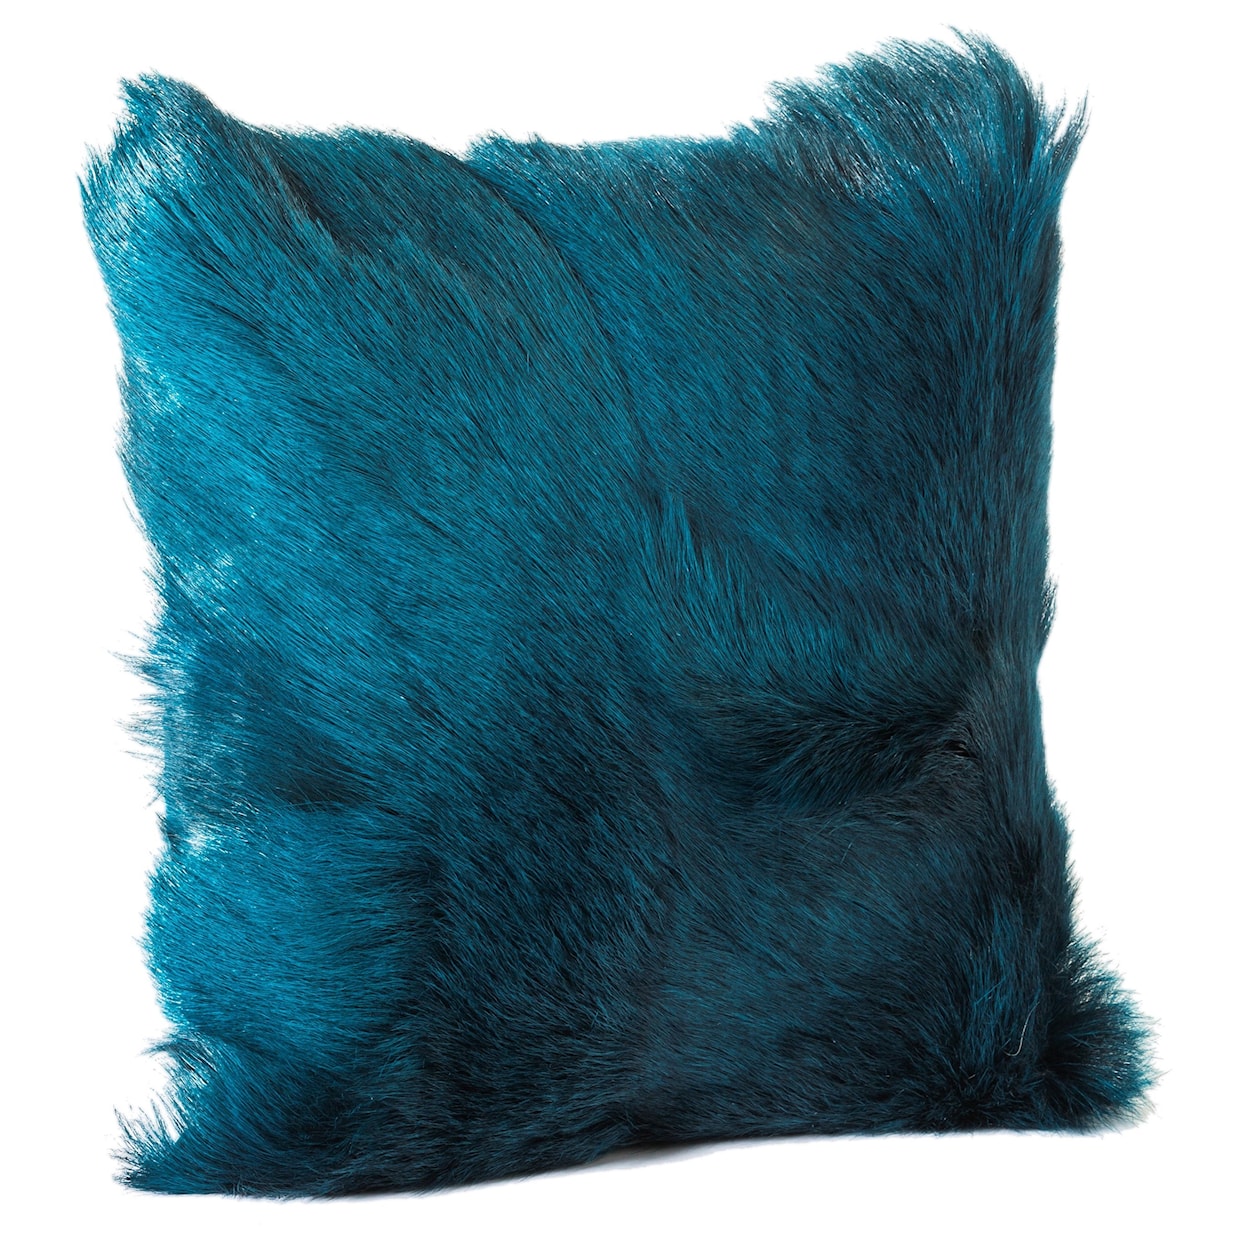 Moe's Home Collection Pillows and Throws Goat Fur Pillow Teal